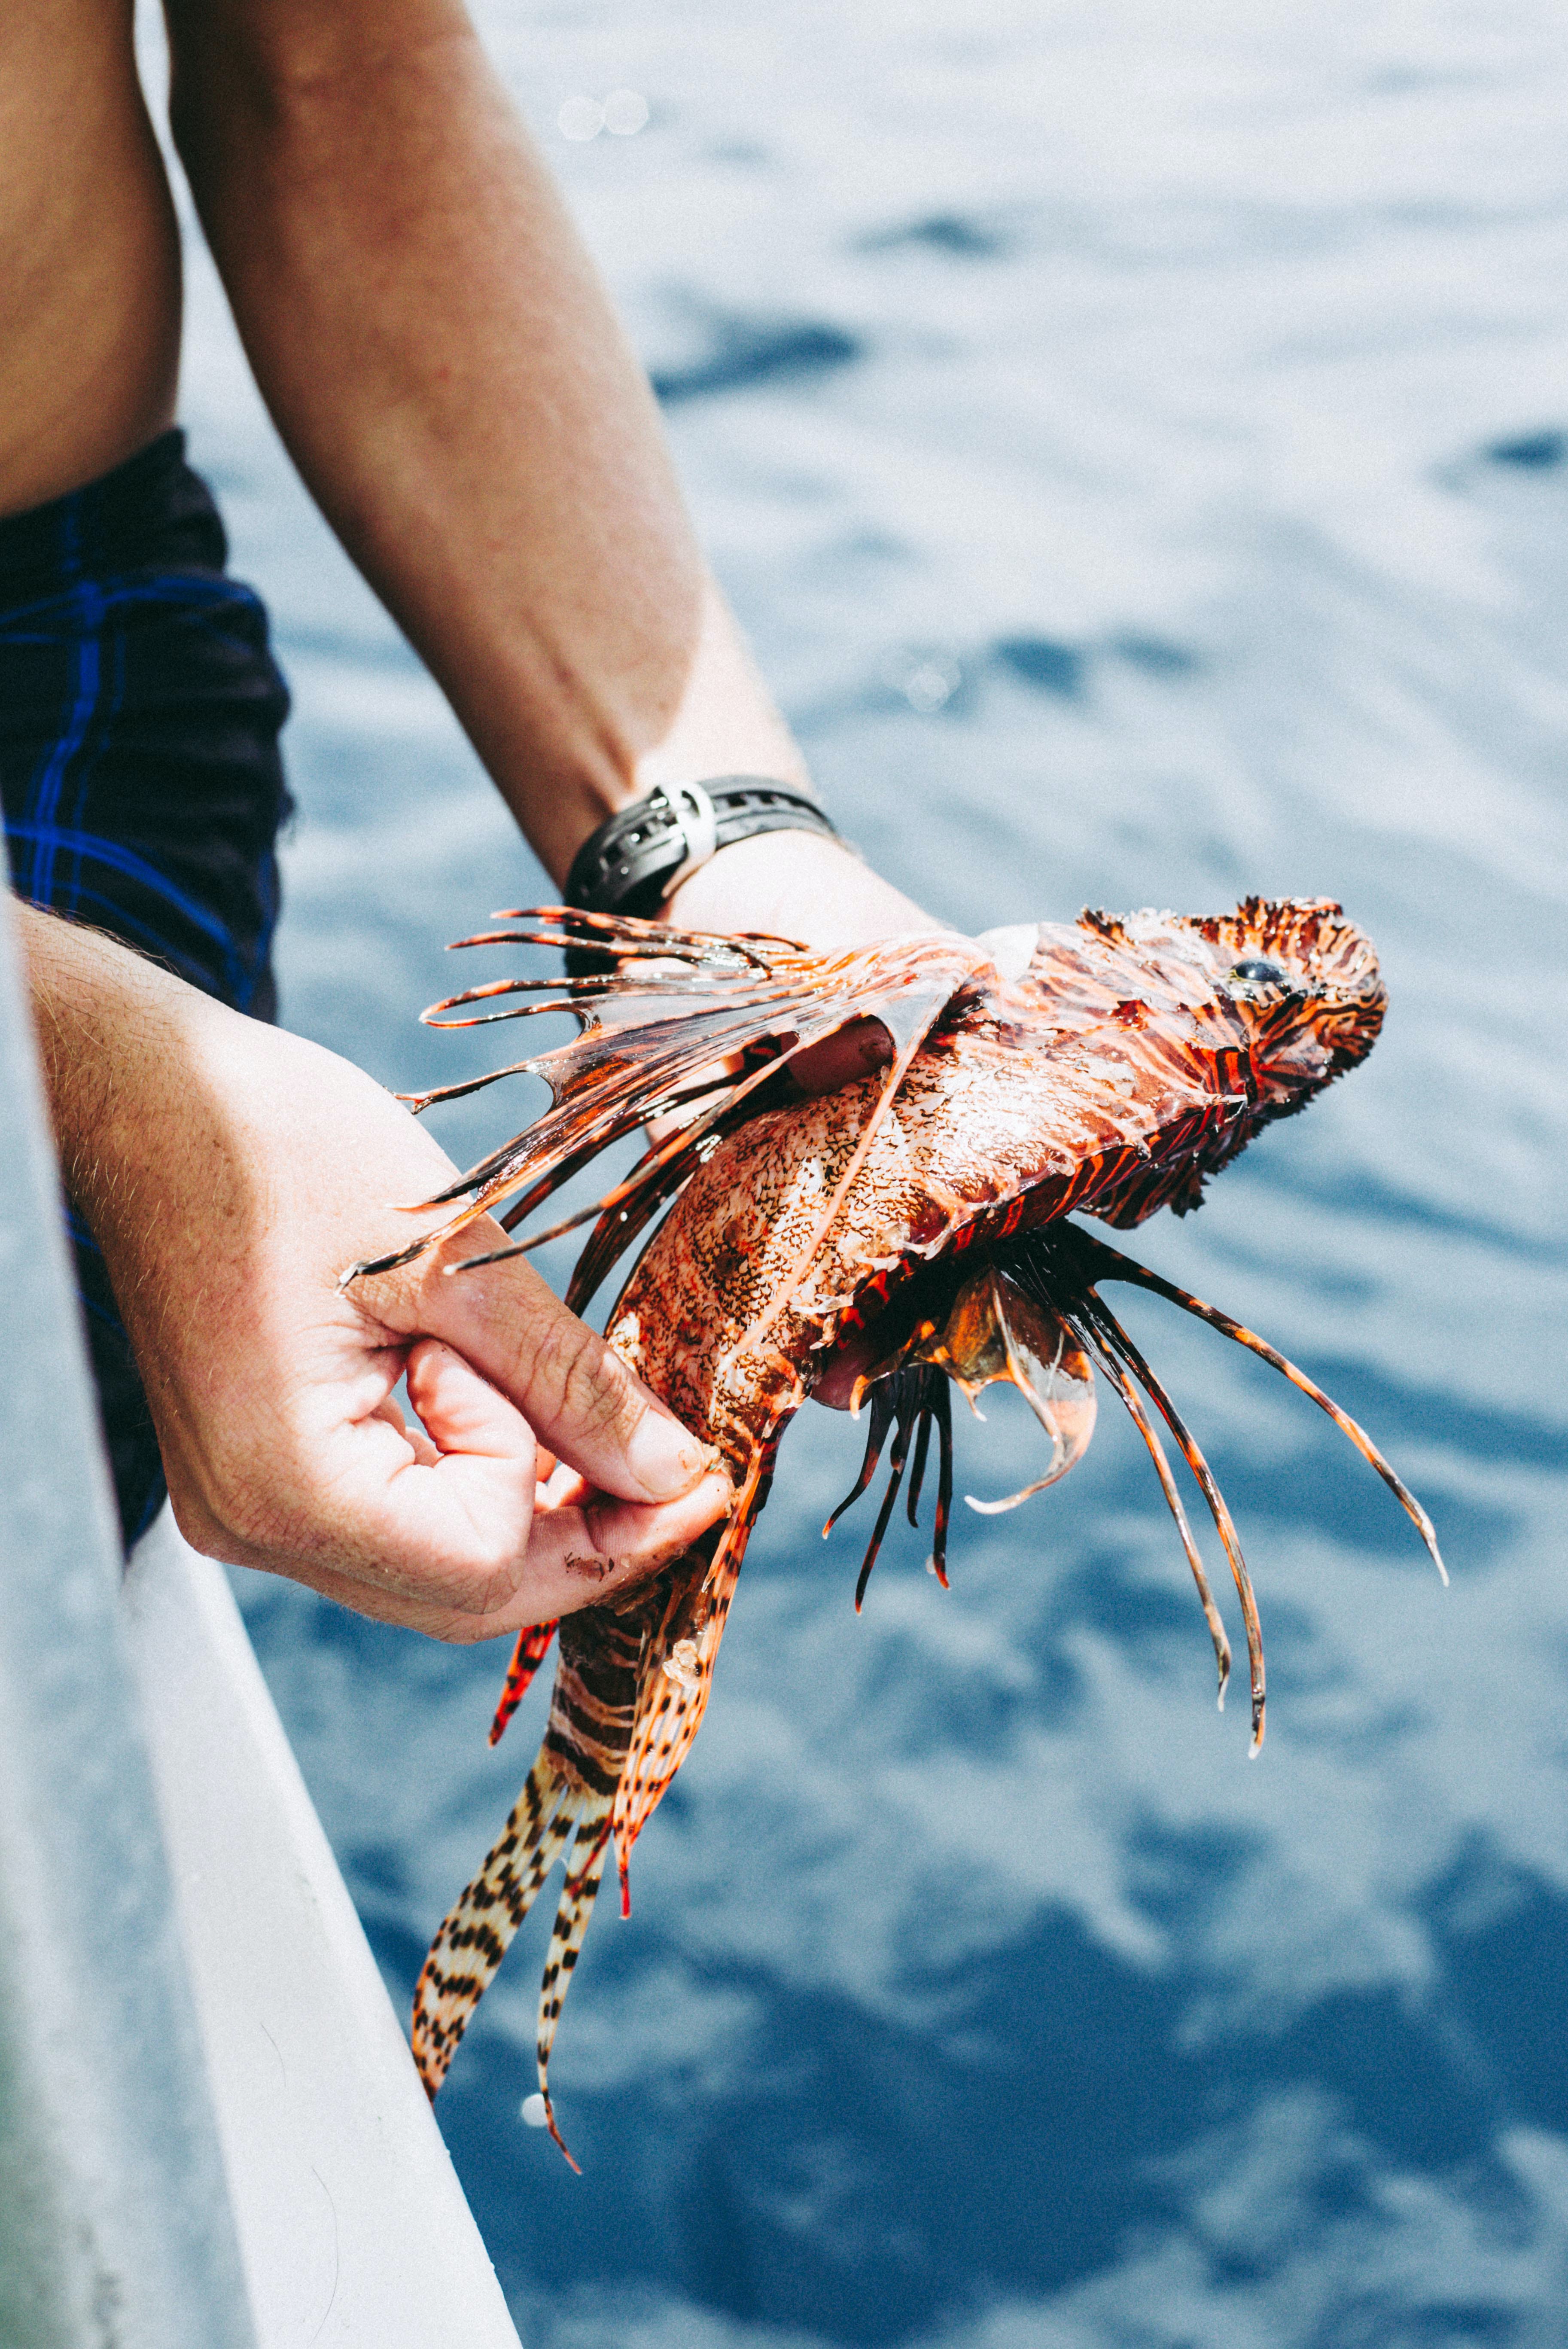 A person holds a lionfish they fished out of the ocean